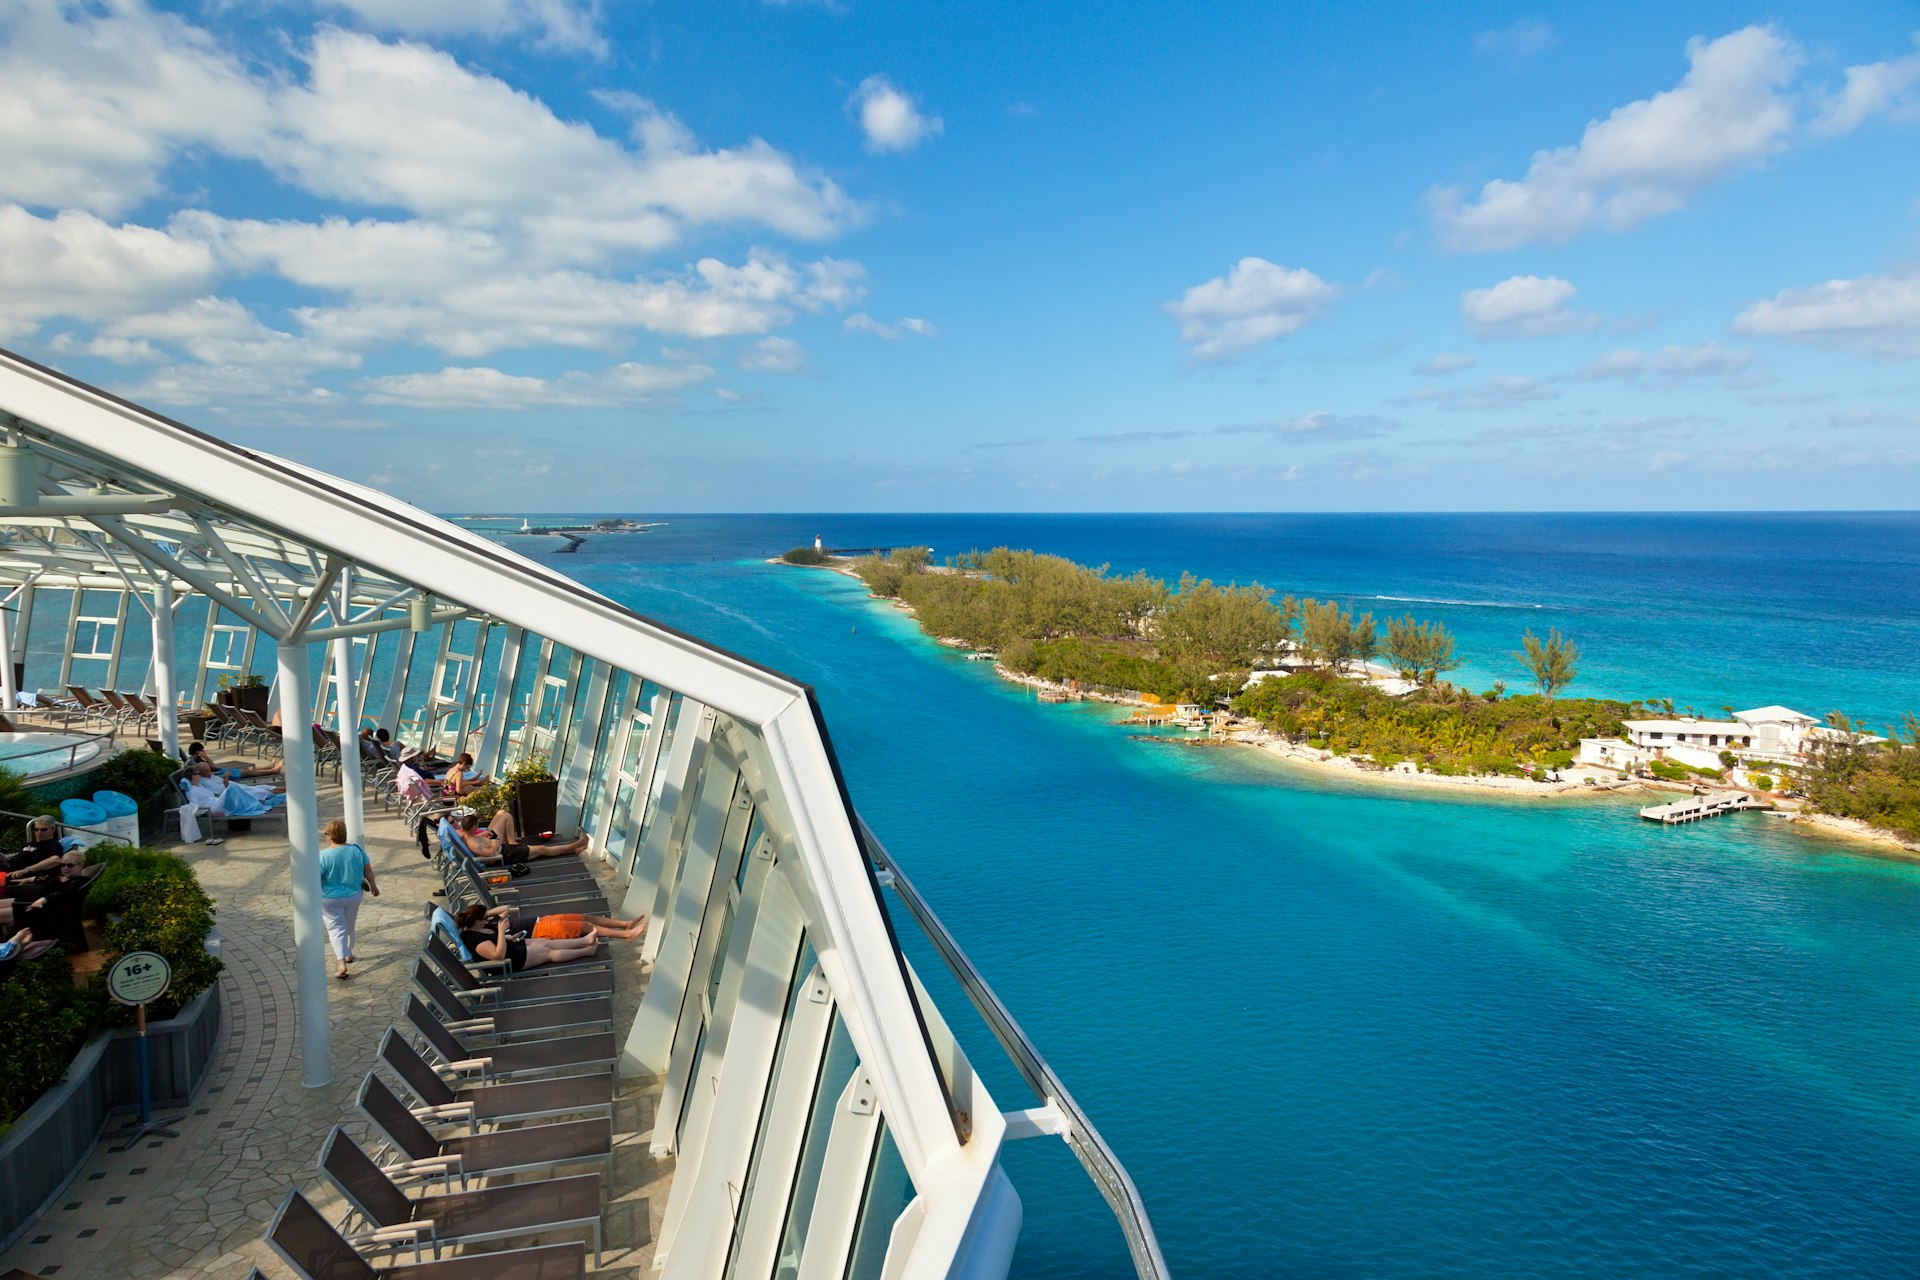 Passengers relax as the Oasis of the Seas departs the Bahamas 